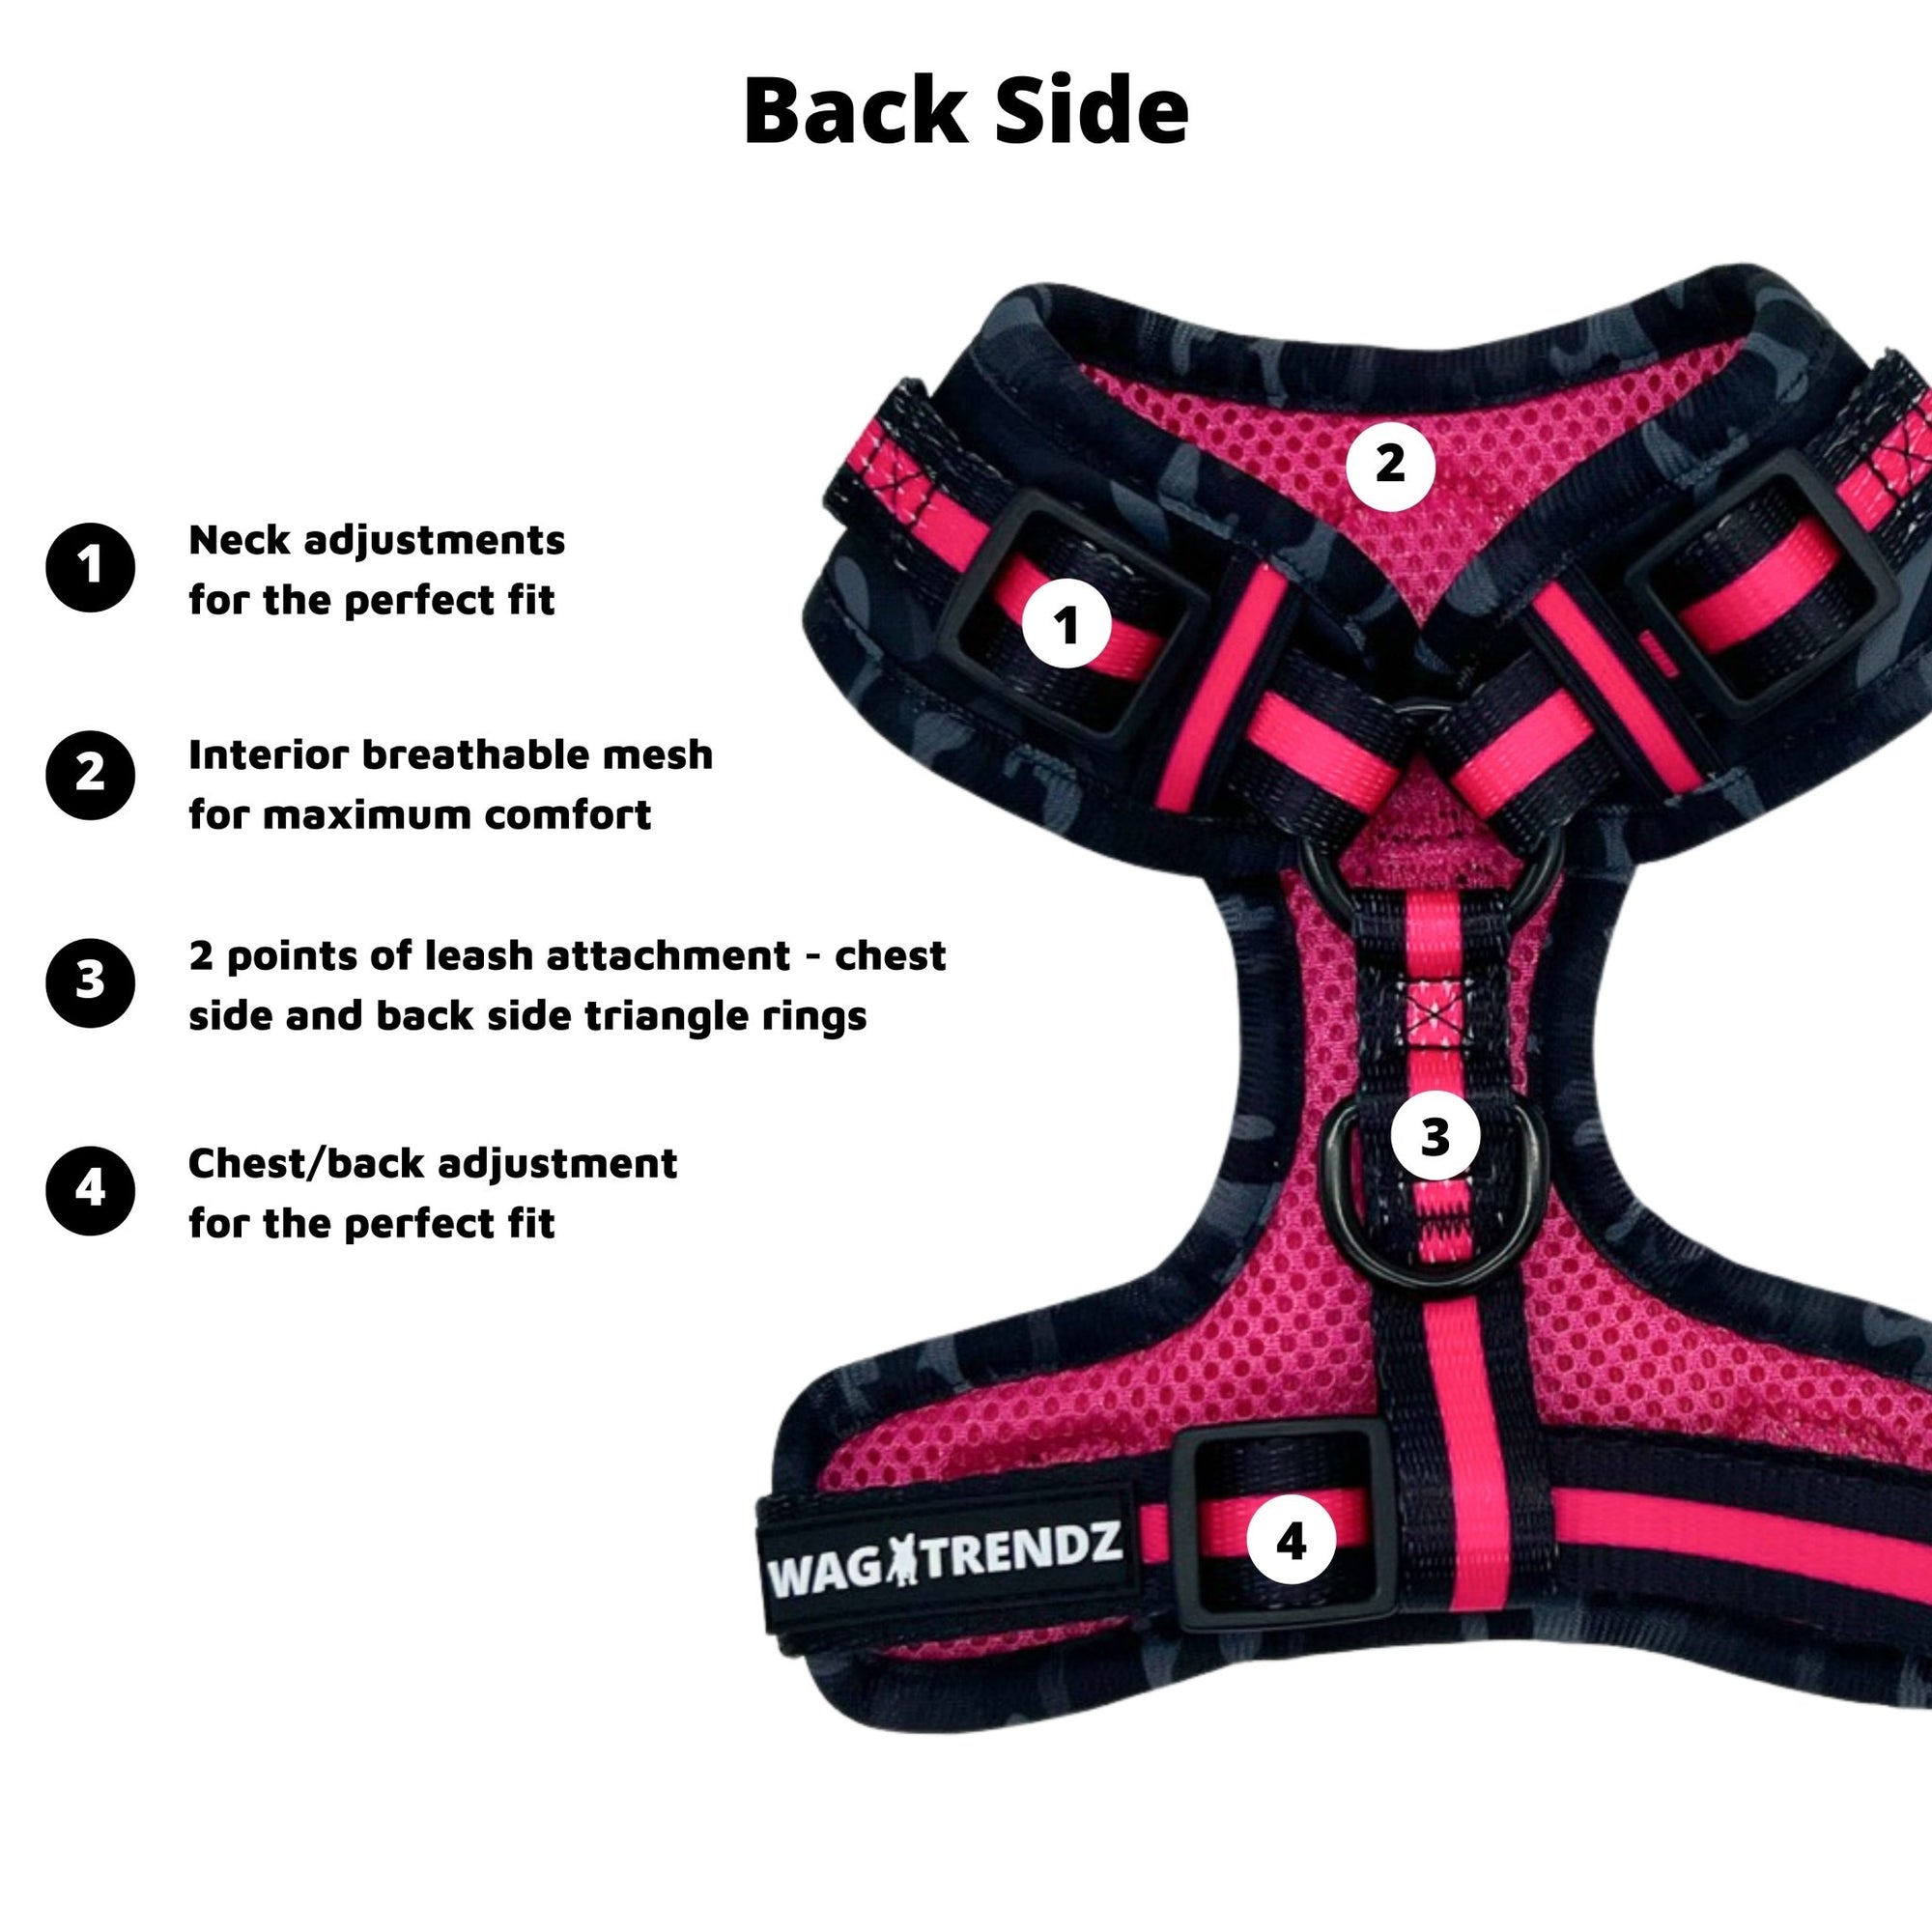 No Pull Dog Harness - black and gray camo adjustable harness with hot pink accents - back view against a solid white background with product feature captions - Wag Trendz